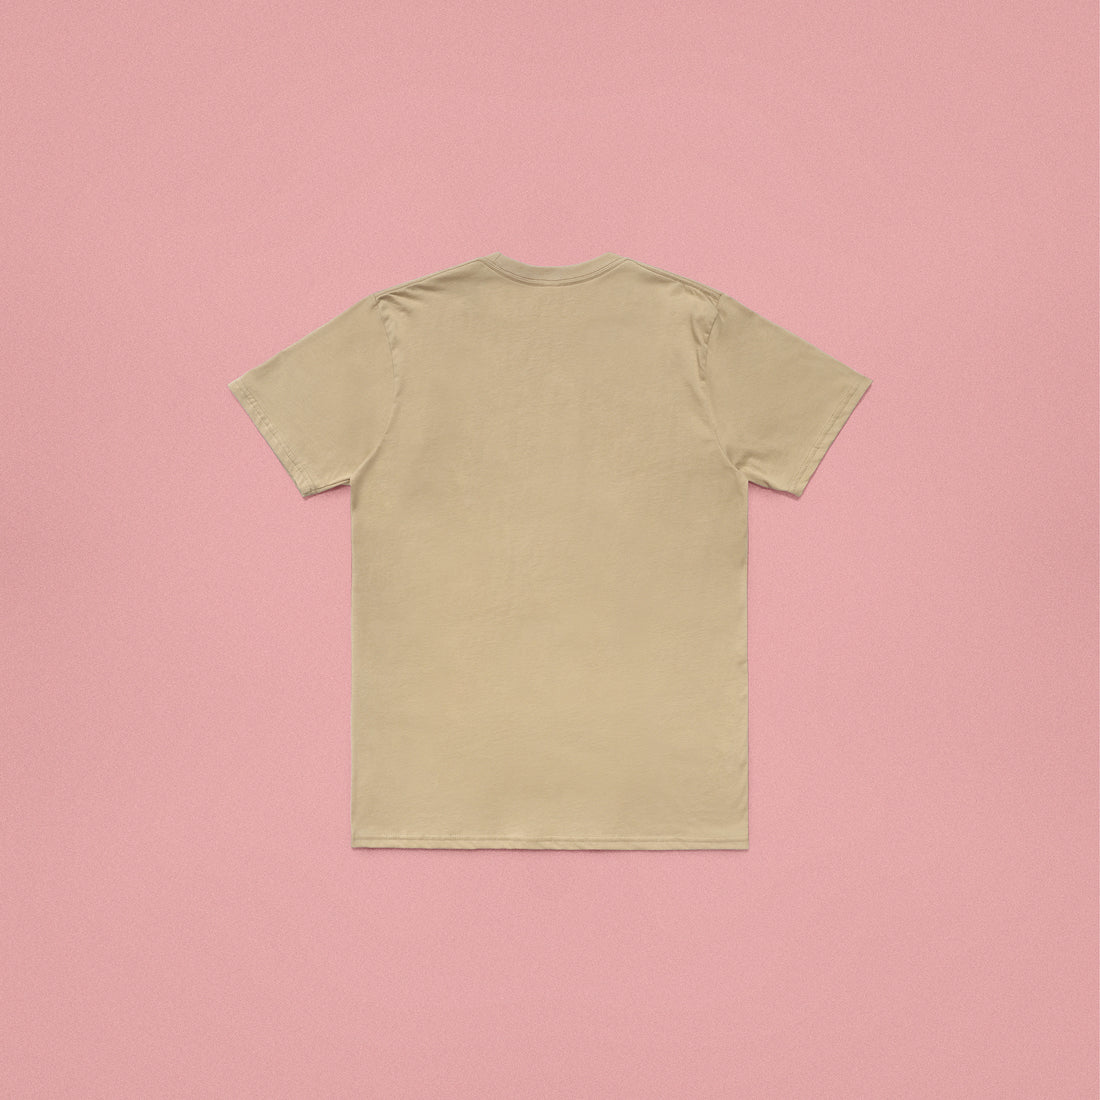 Handle With Care Short Sleeved Tee (Champagne)